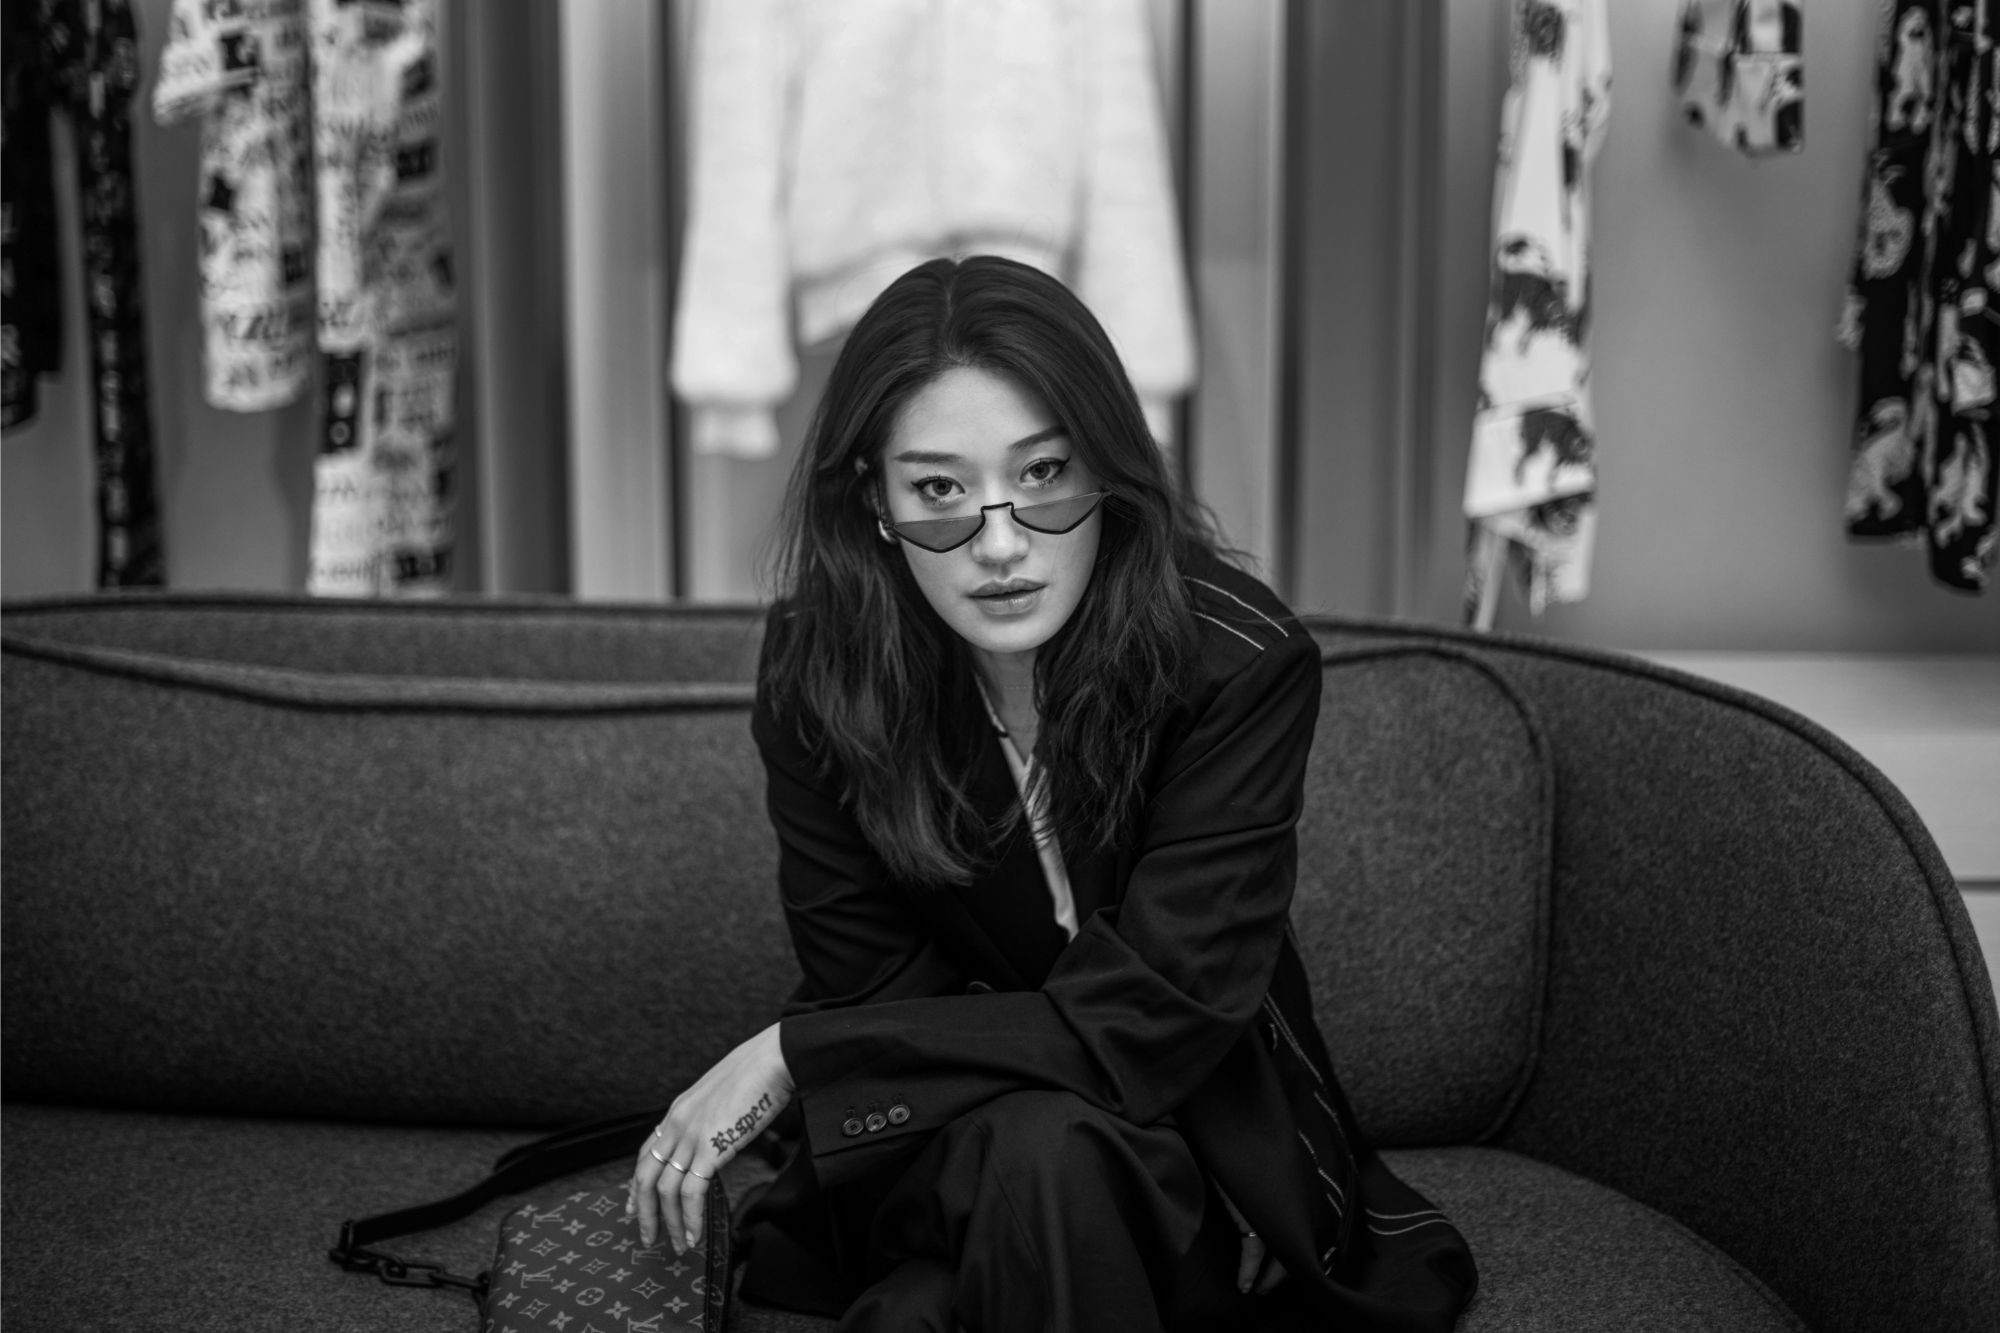 Fast Facts w/ Peggy Gou 